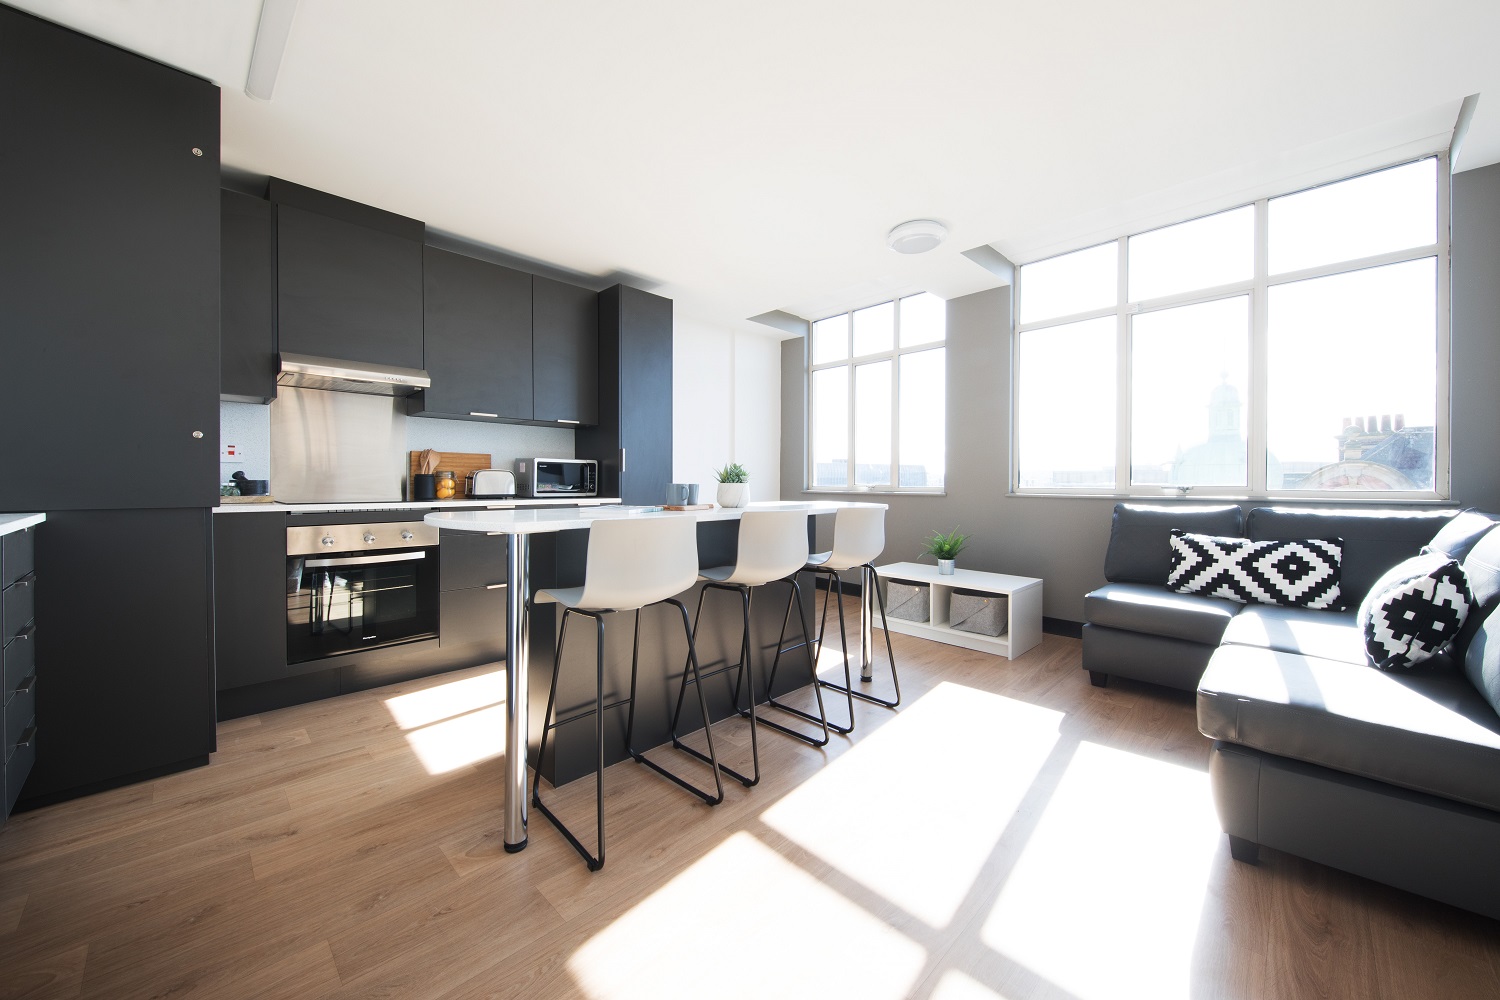 Shared kitchen for en-suite rooms at Magnet Court, Unite Students accommodation